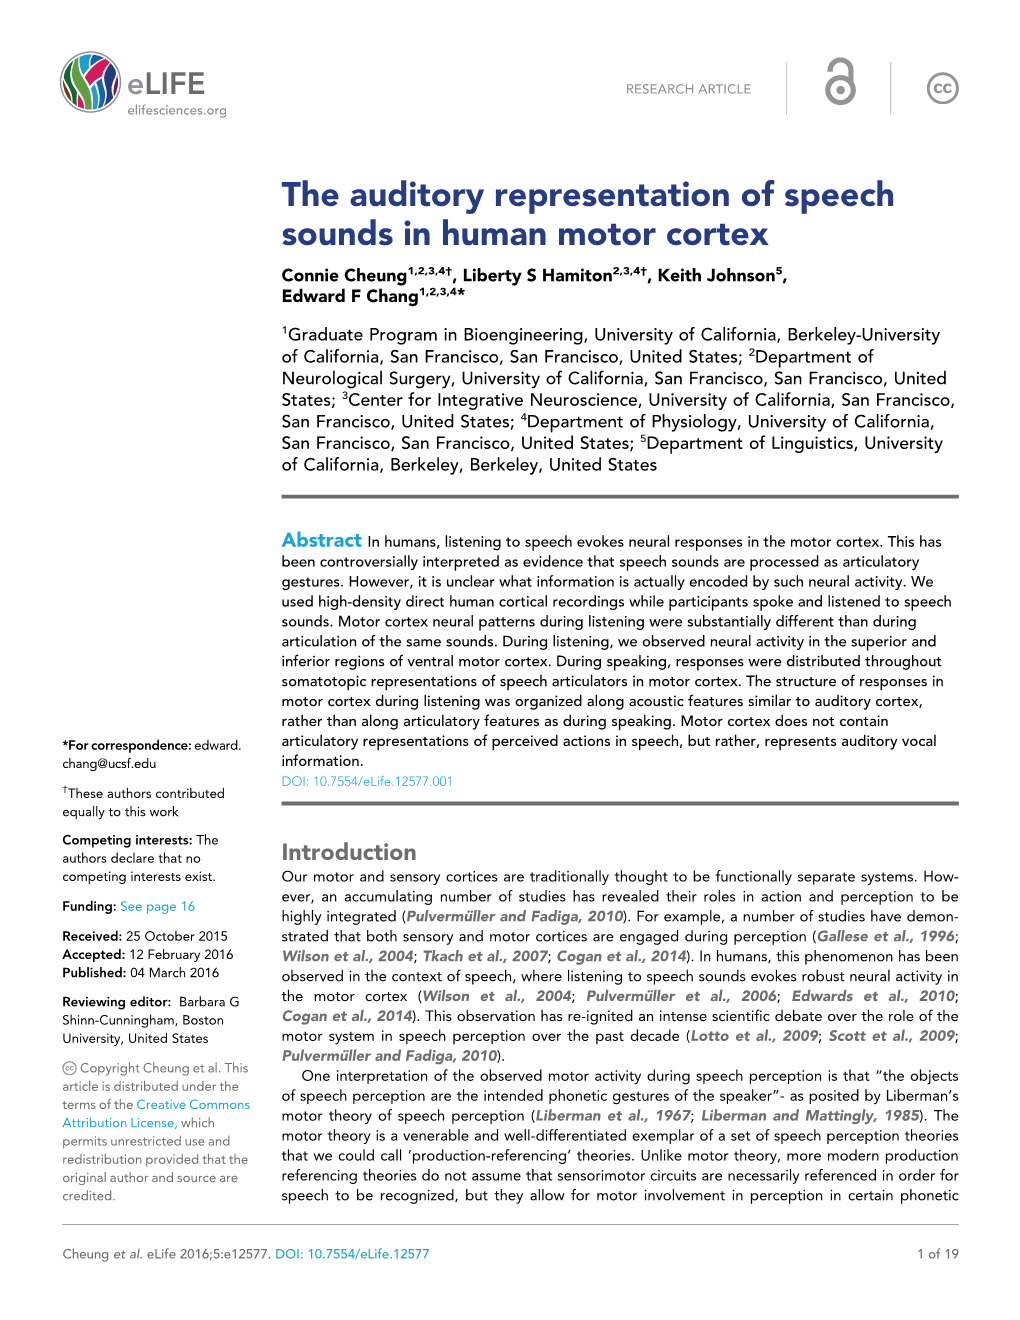 The Auditory Representation of Speech Sounds in Human Motor Cortex Connie Cheung1,2,3,4†, Liberty S Hamiton2,3,4†, Keith Johnson5, Edward F Chang1,2,3,4*